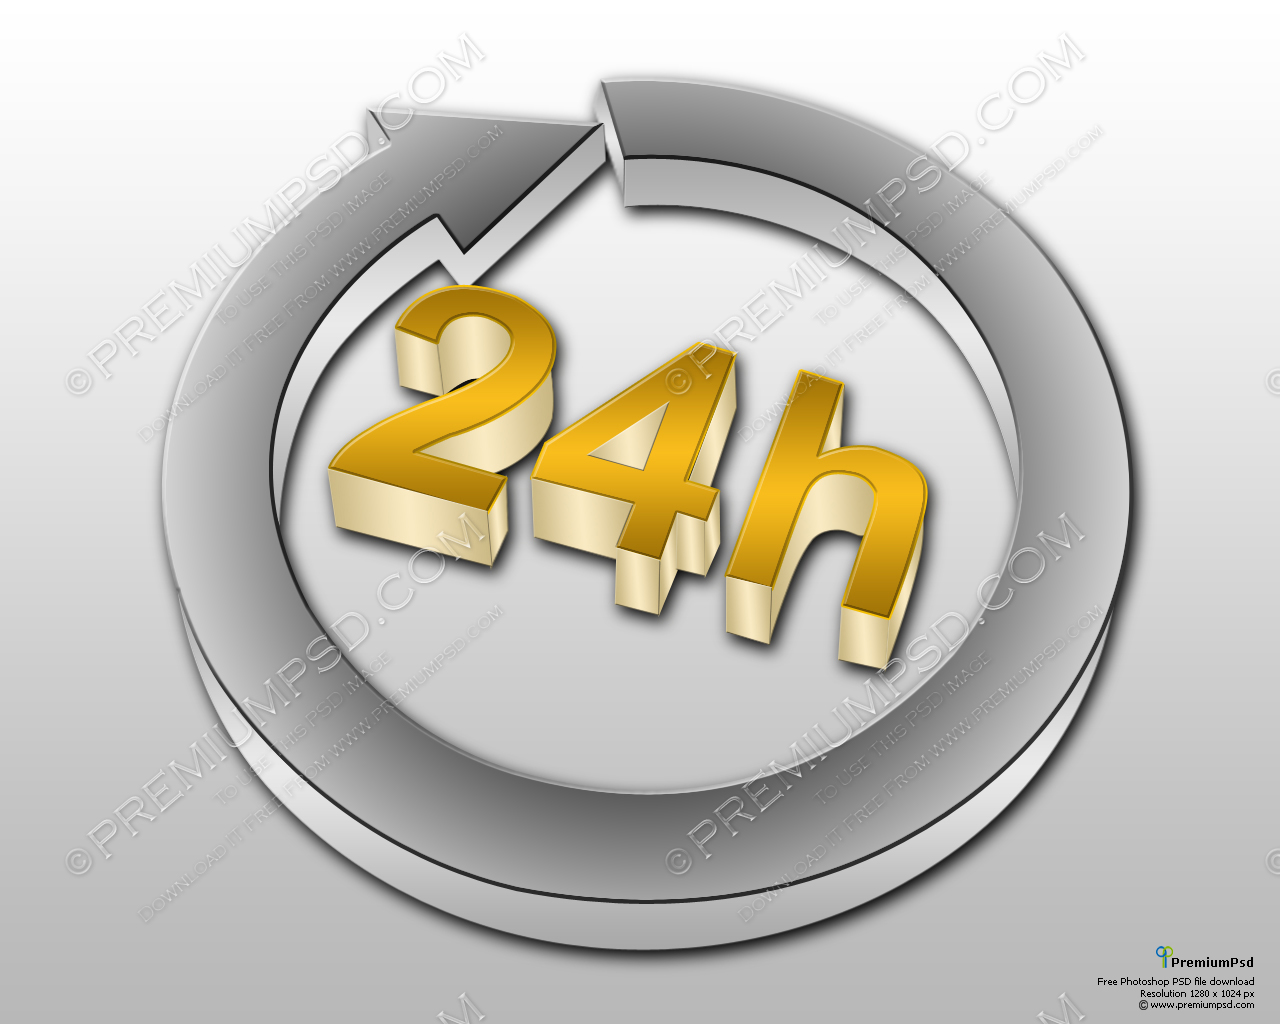 24 Hours Delivery Sign   Psd Download   Premium Psd